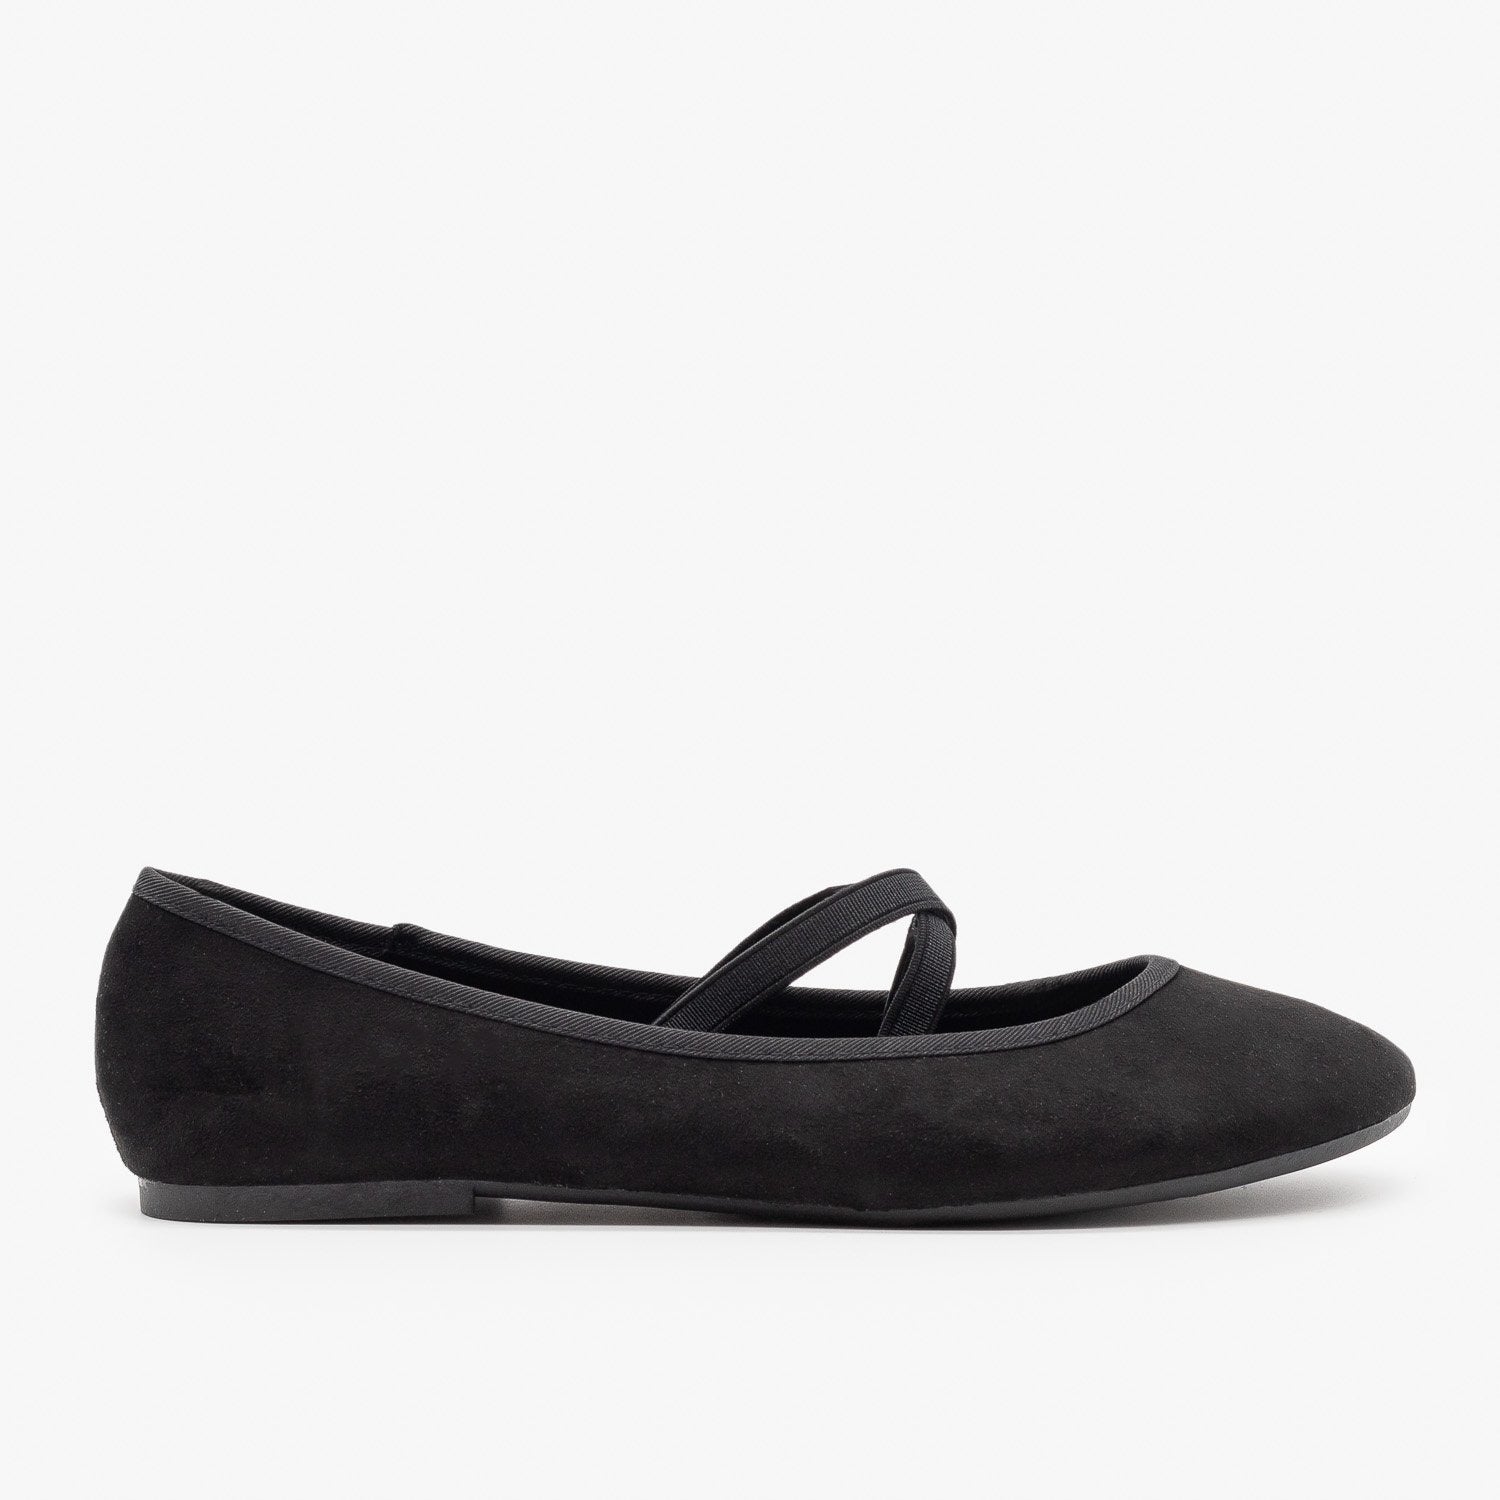 ballet flats with criss cross straps